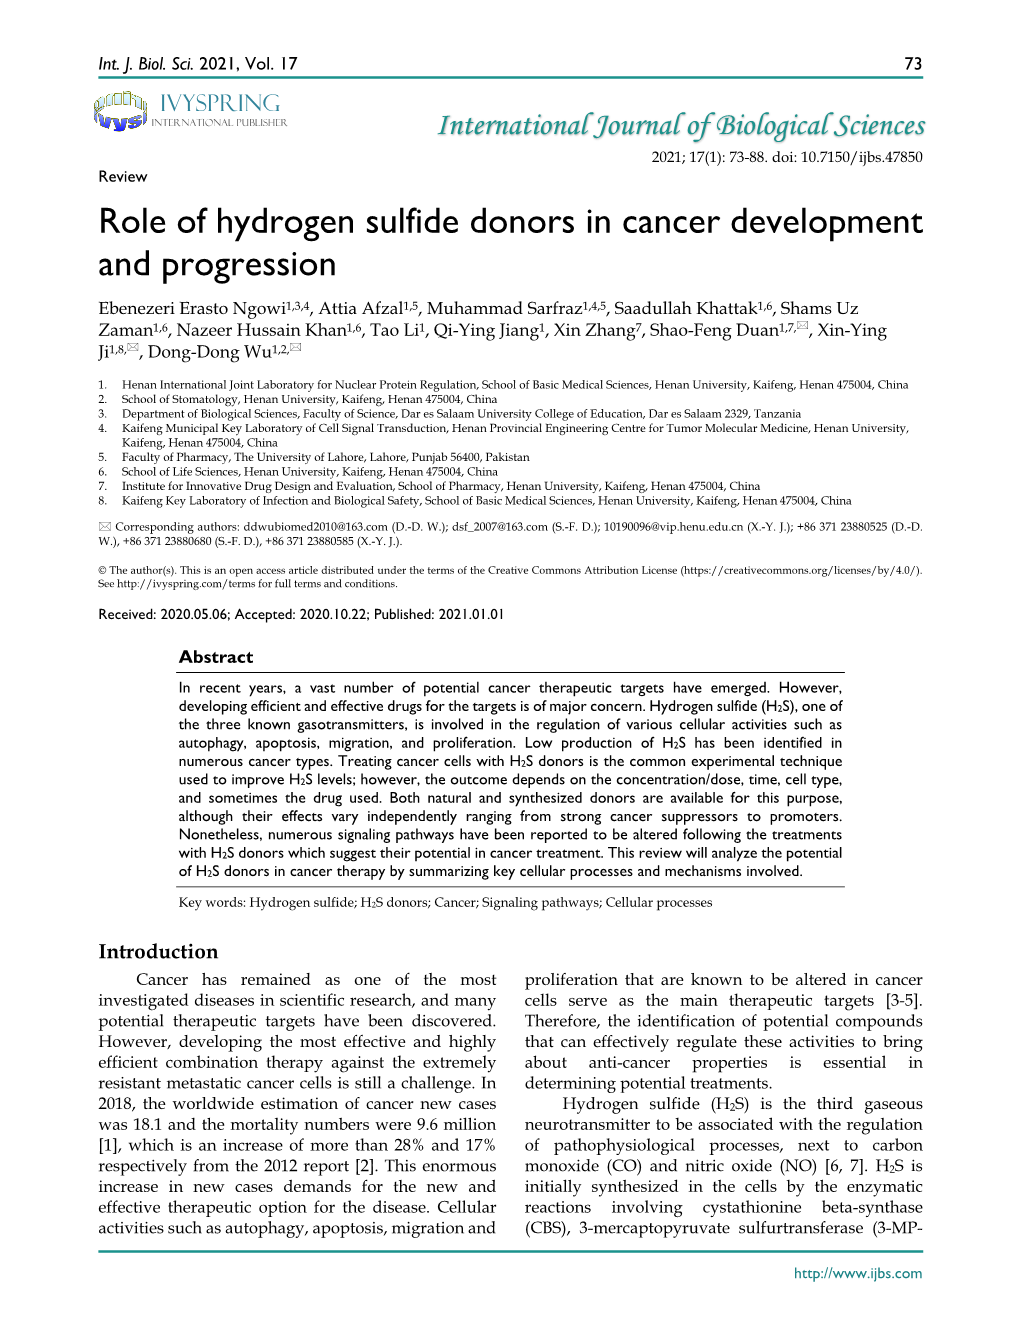 Role of Hydrogen Sulfide Donors in Cancer Development and Progression